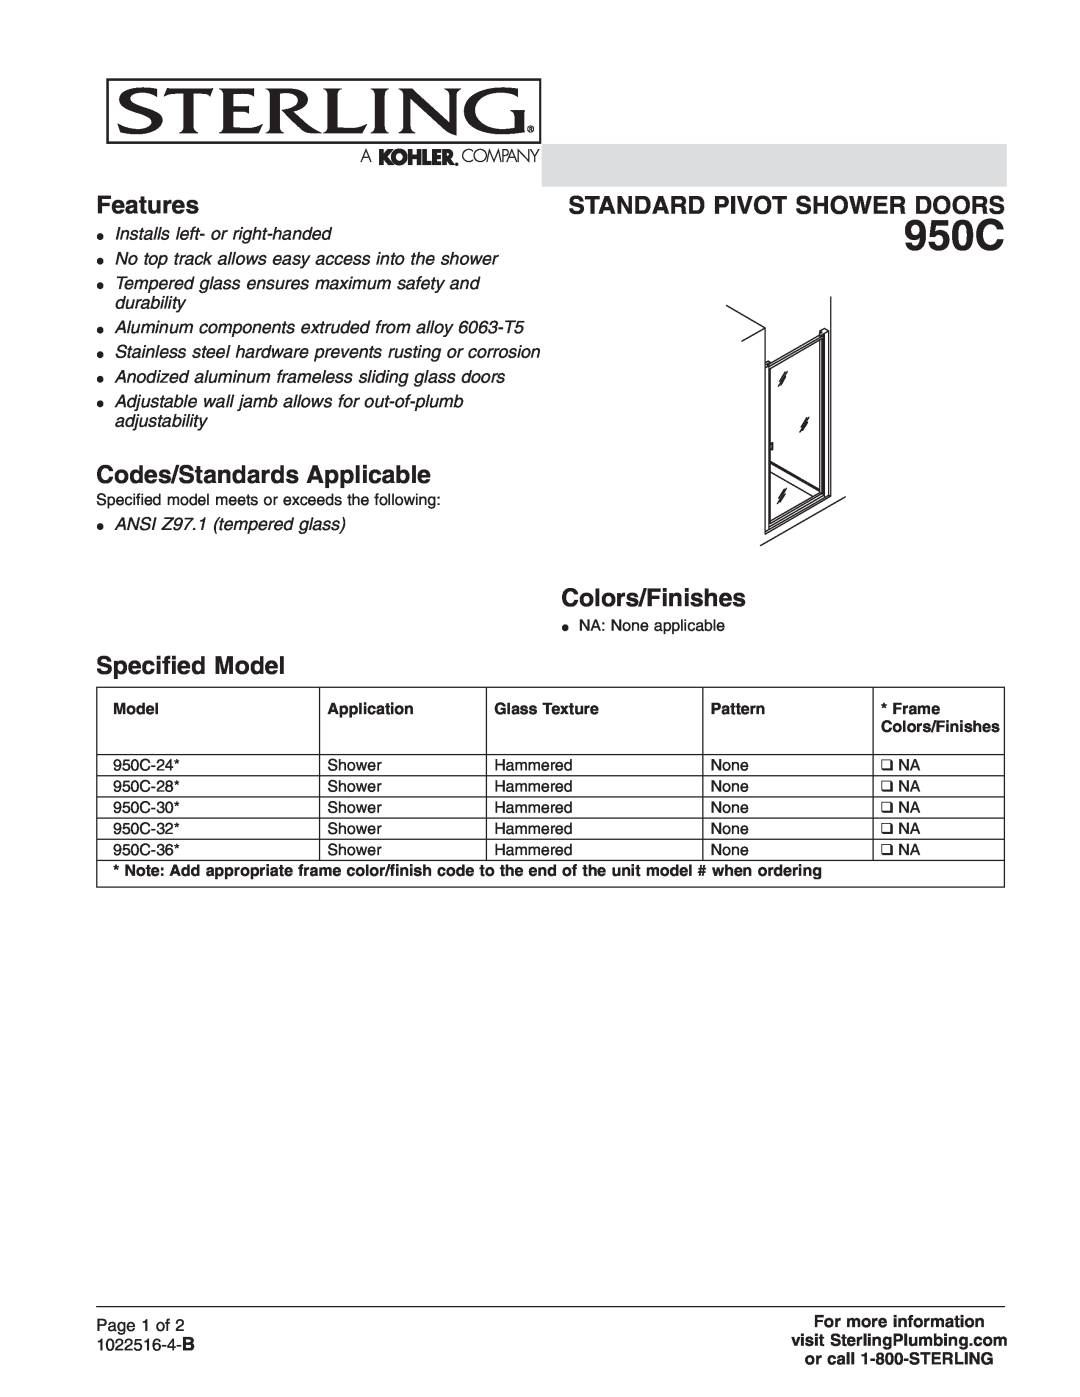 Sterling Plumbing 950C-24* manual Codes/Standards Applicable, Colors/Finishes, Speciﬁed Model, Features, Page 1 of 